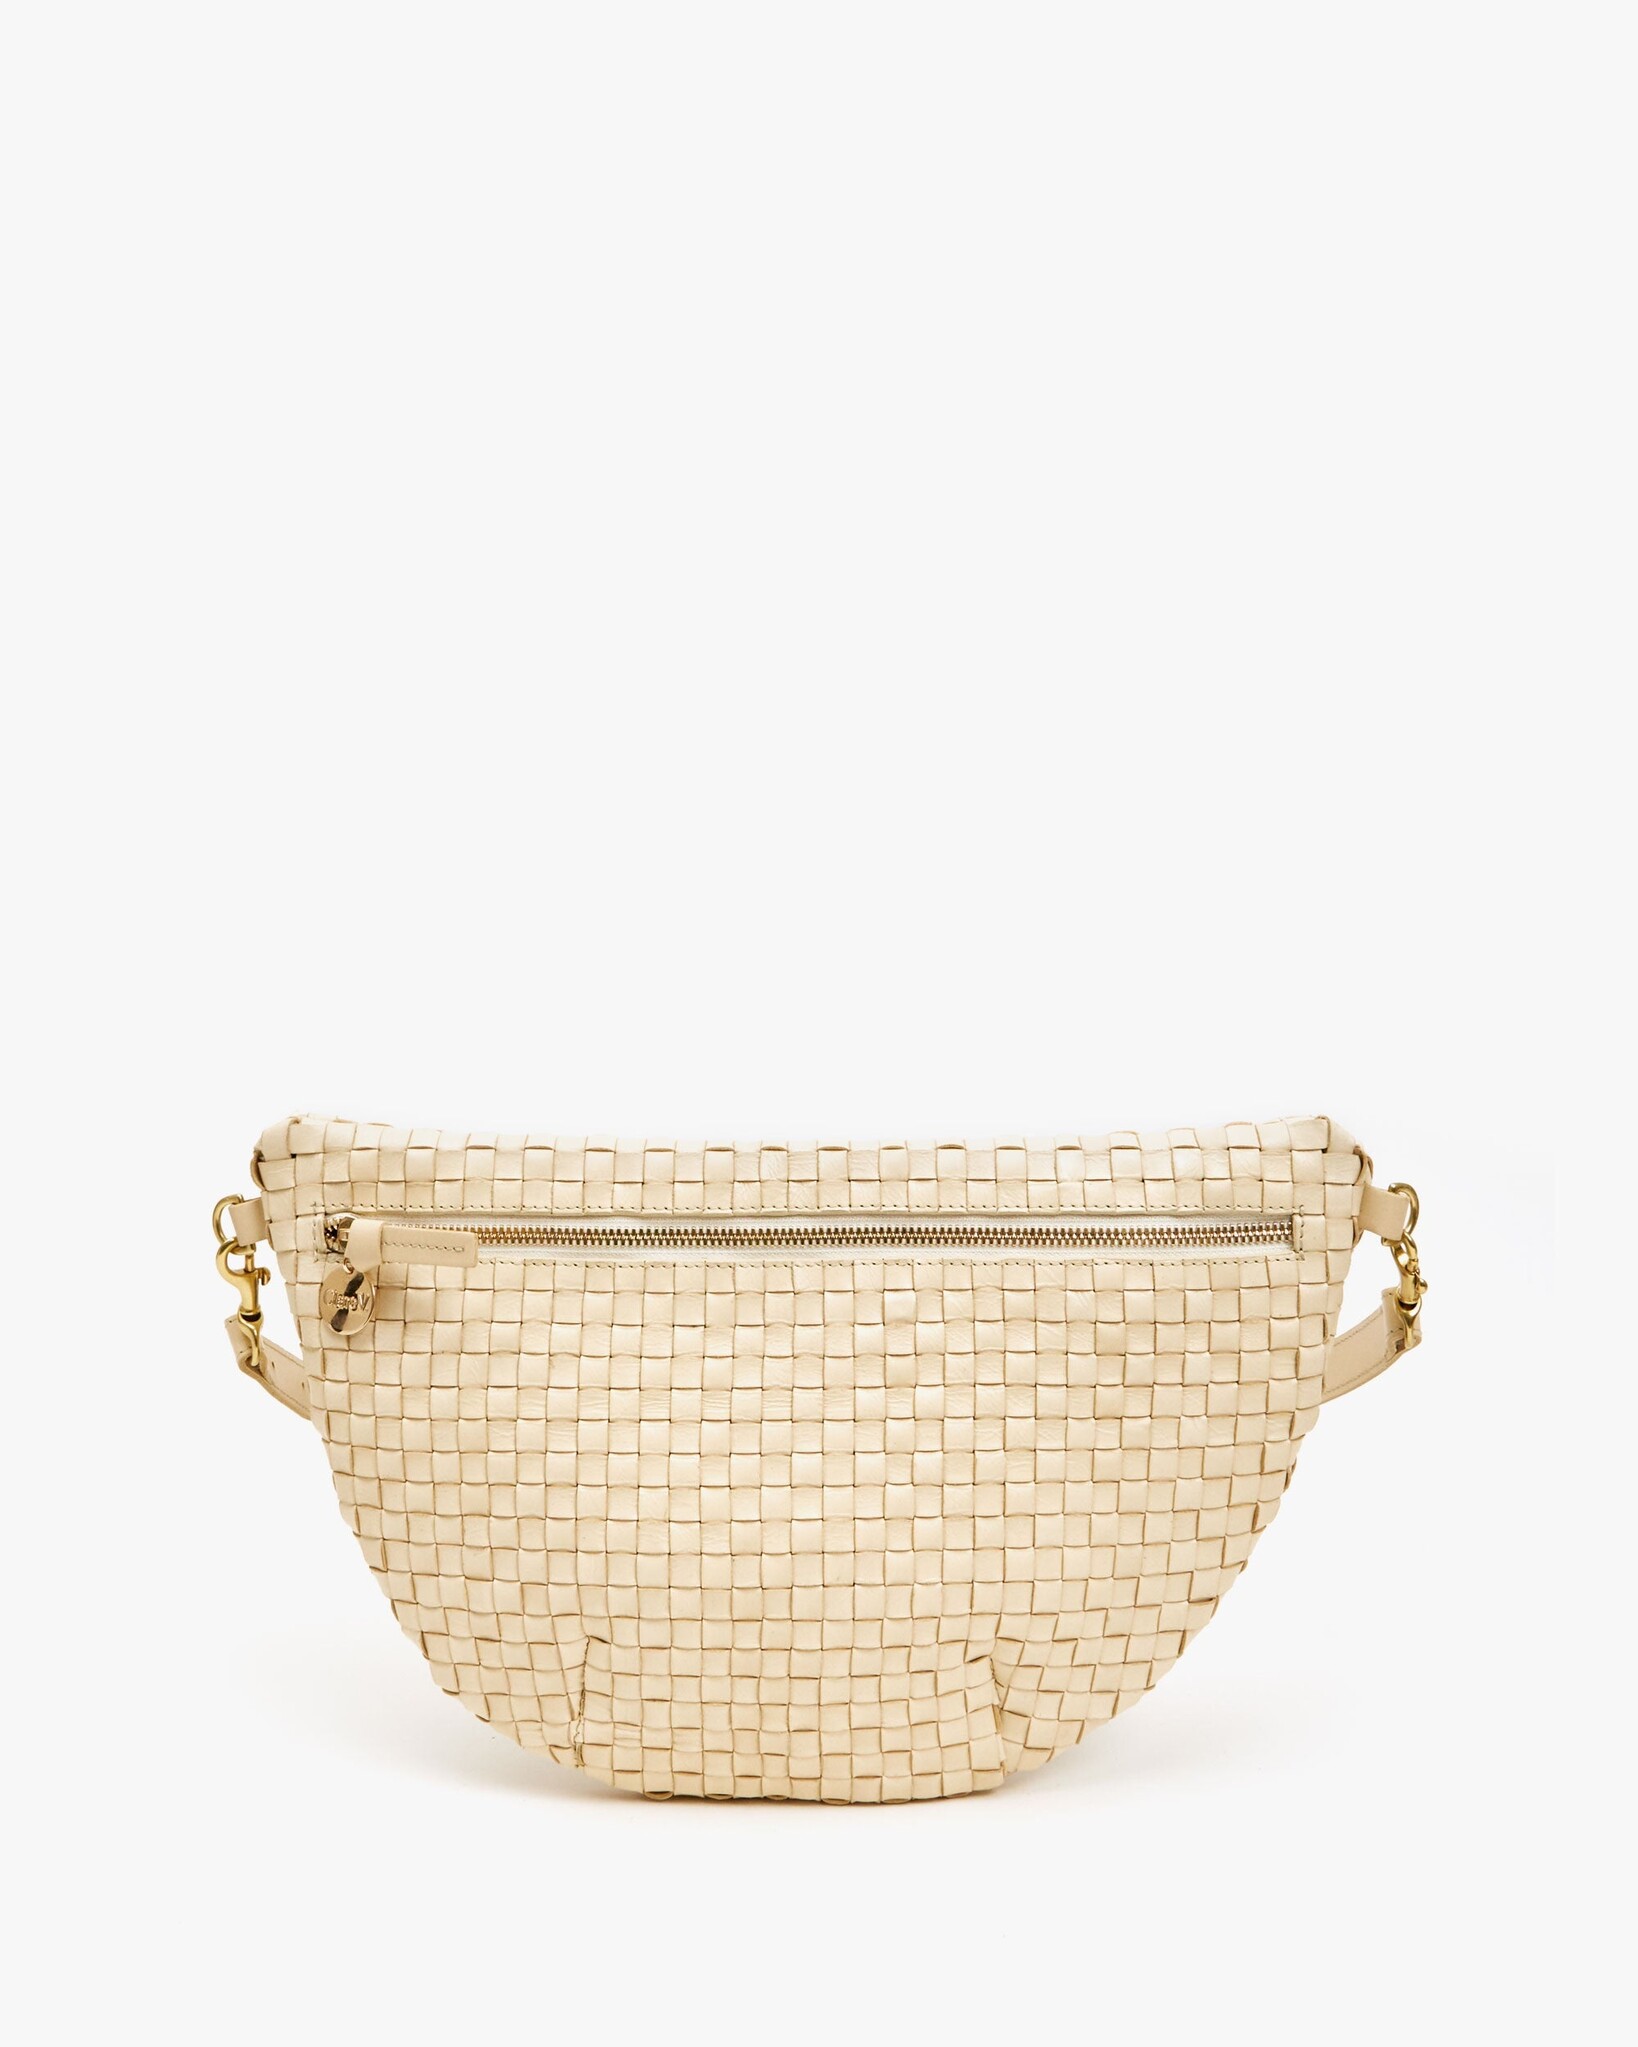 Clare V, Bags, Clare V Wallet Clutch Yellow Gold